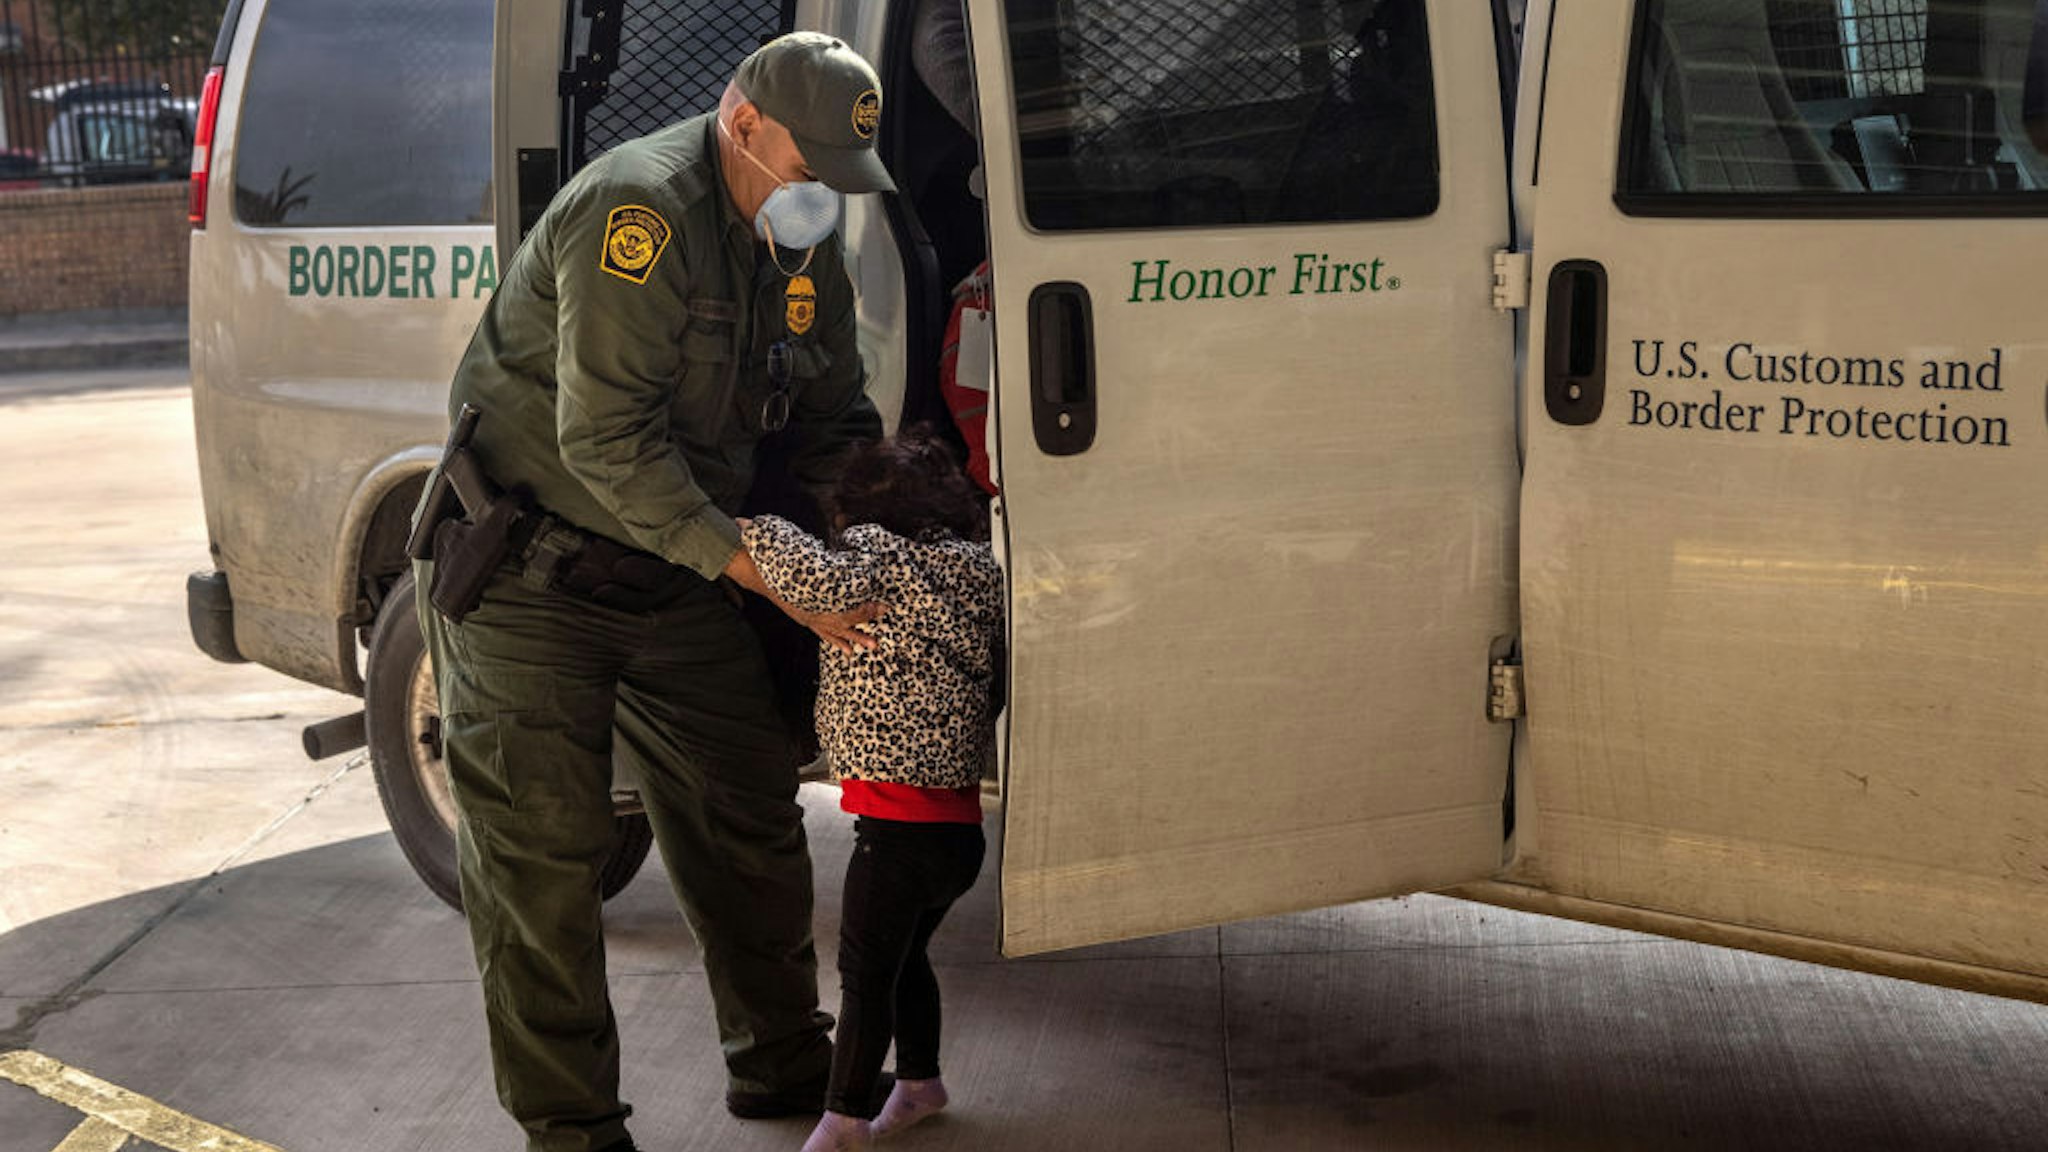 BROWNSVILLE, TEXAS - FEBRUARY 25: A U.S. Border Patrol agent releases a young asylum seeker with her family at a bus station on February 25, 2021 in Brownsville, Texas. U.S. immigration authorities are now releasing asylum seeking families after they cross the U.S.-Mexico border and taken into custody. The immigrant families are then free to travel to destinations throughout the U.S. while awaiting asylum hearings. (Photo by John Moore/Getty Images)